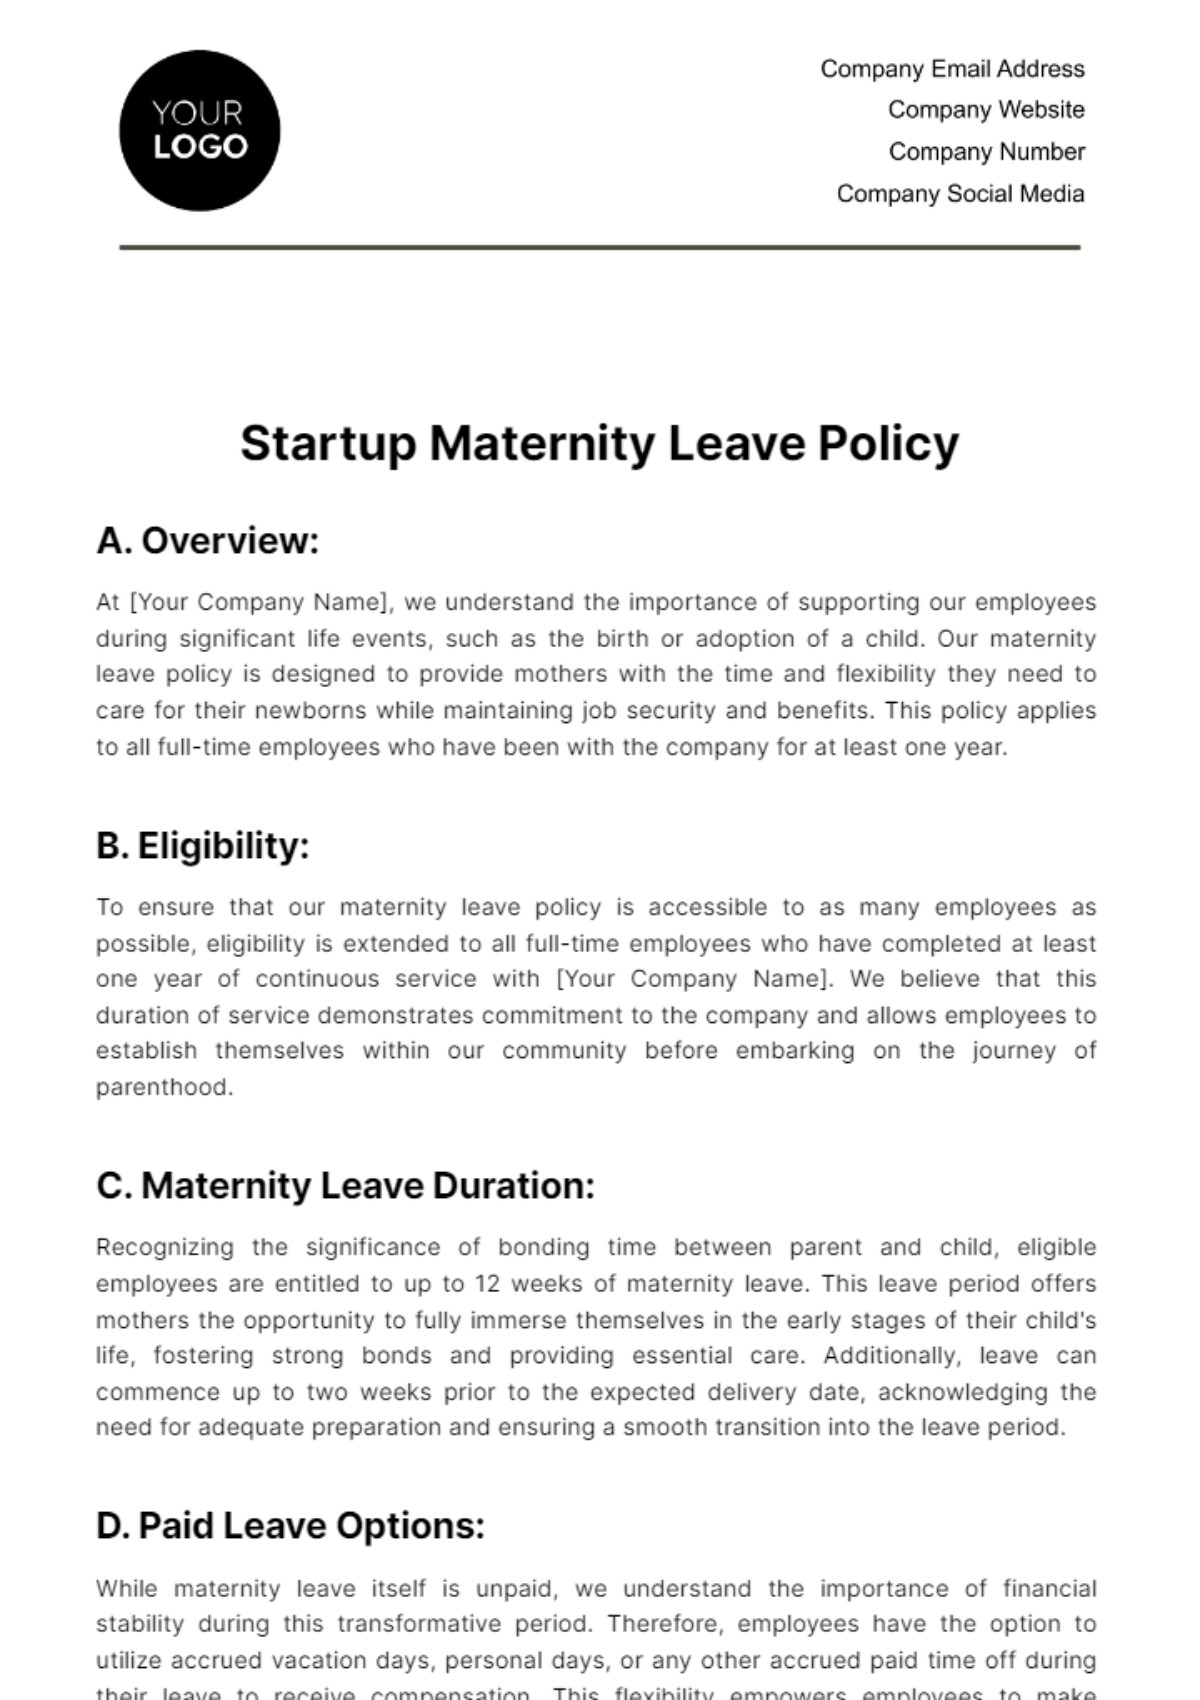 Startup Maternity Leave Policy Template